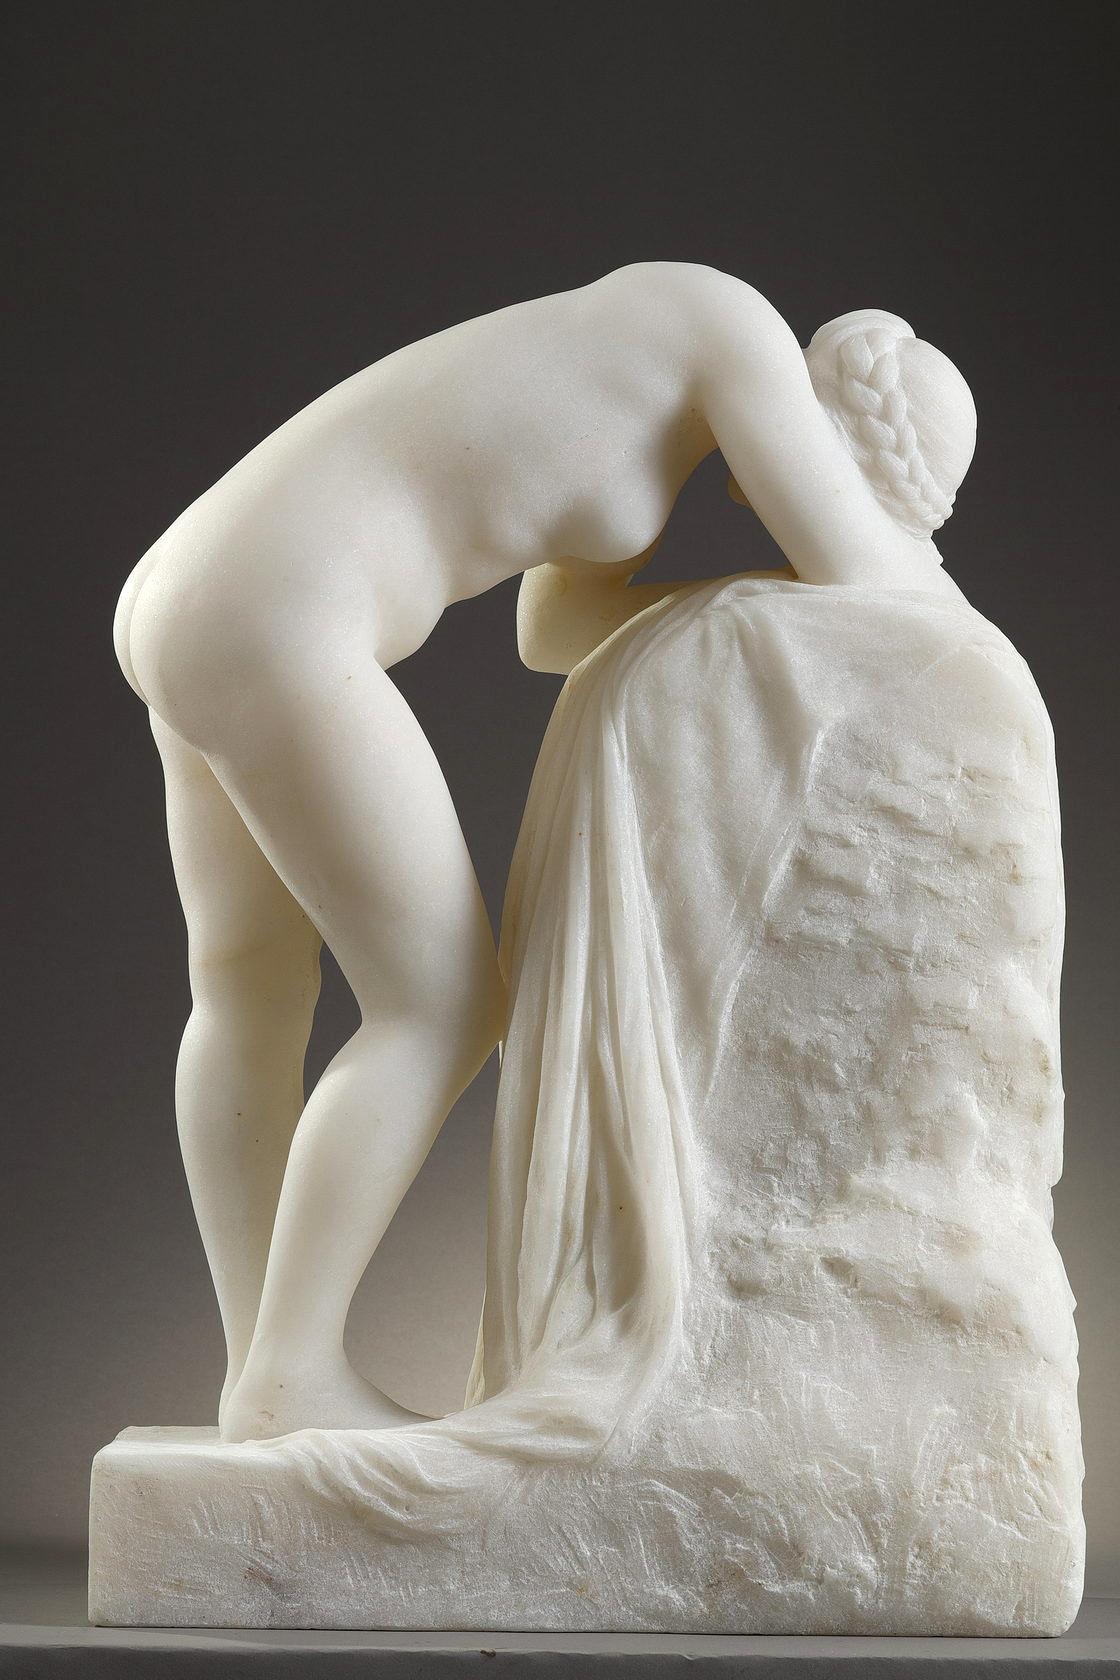 Woman leaning on a stele
by Albert BARTHOLOME (1848-1928)

Sculpture made in white Carrara marble
Signed 